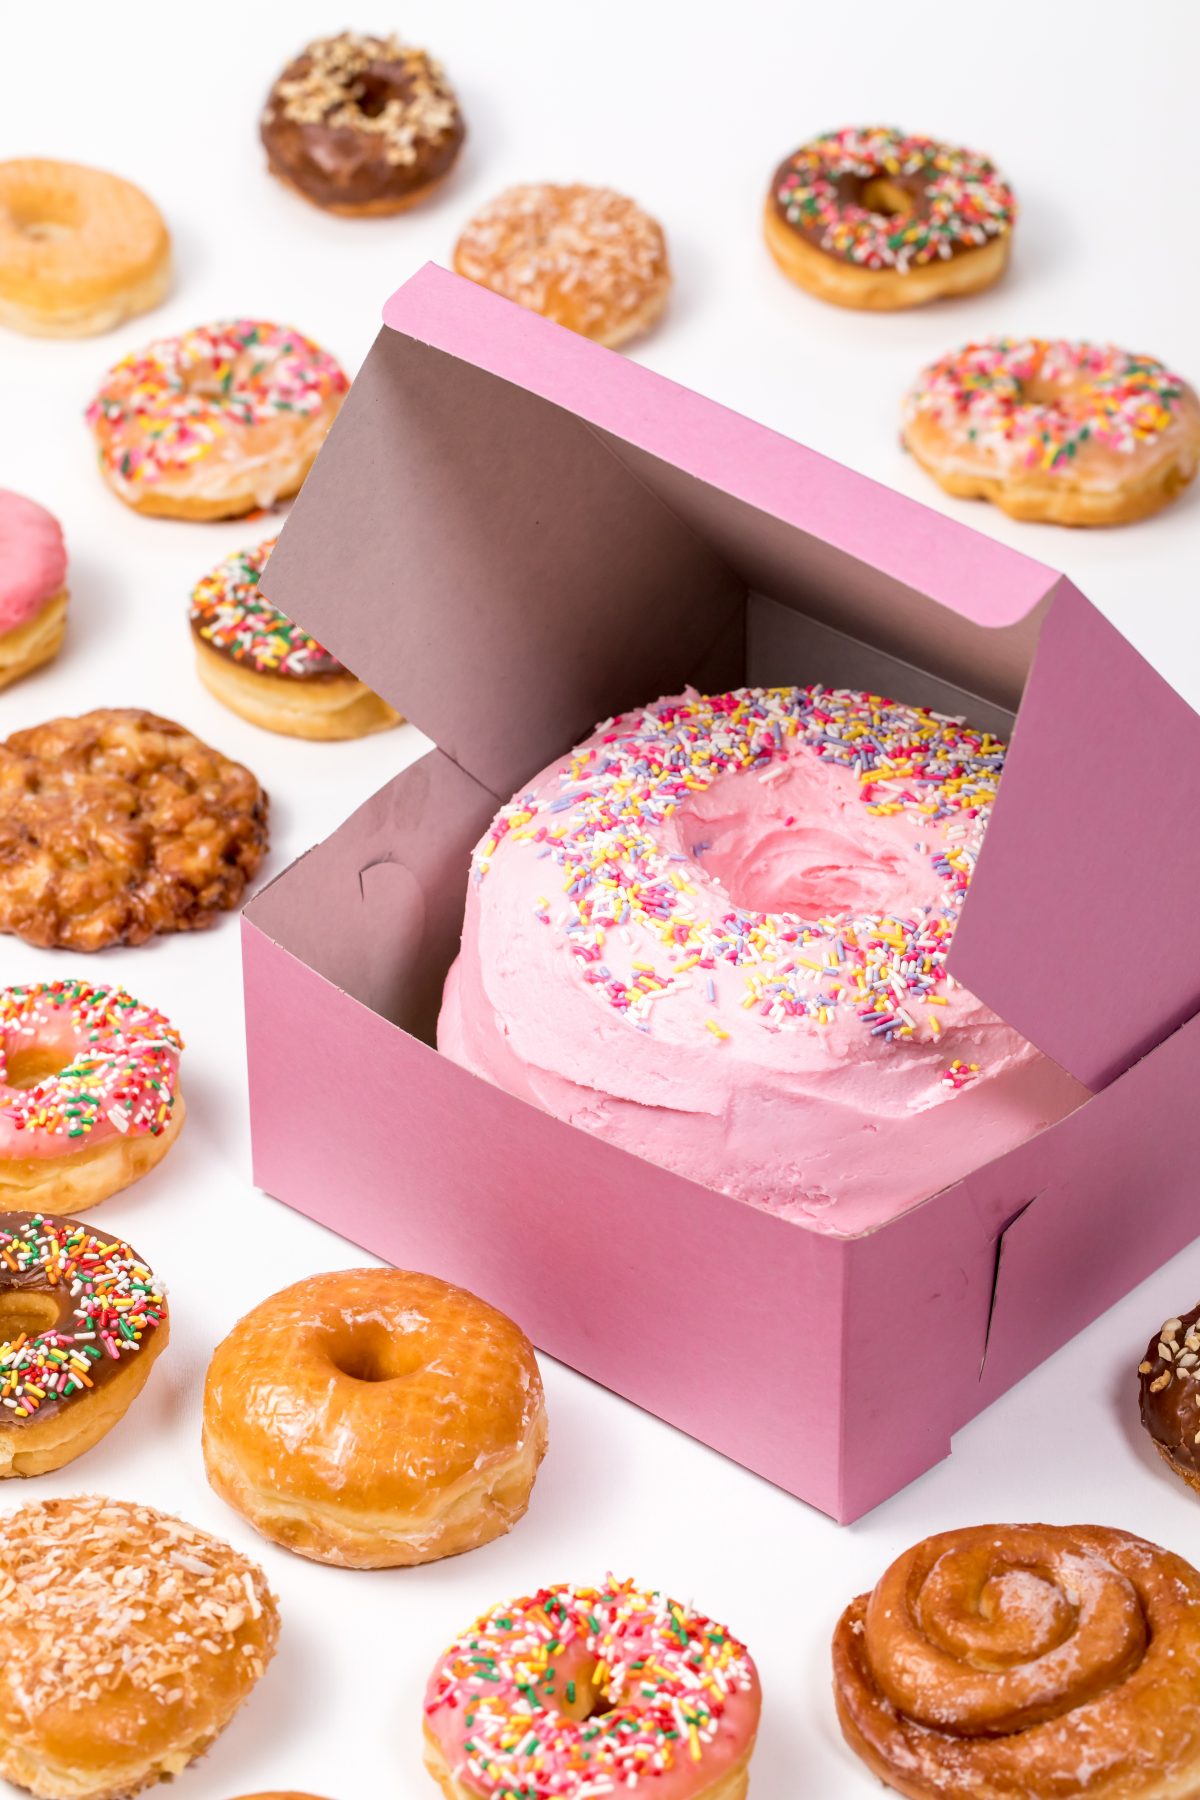 Donuts belong in a pink donut box